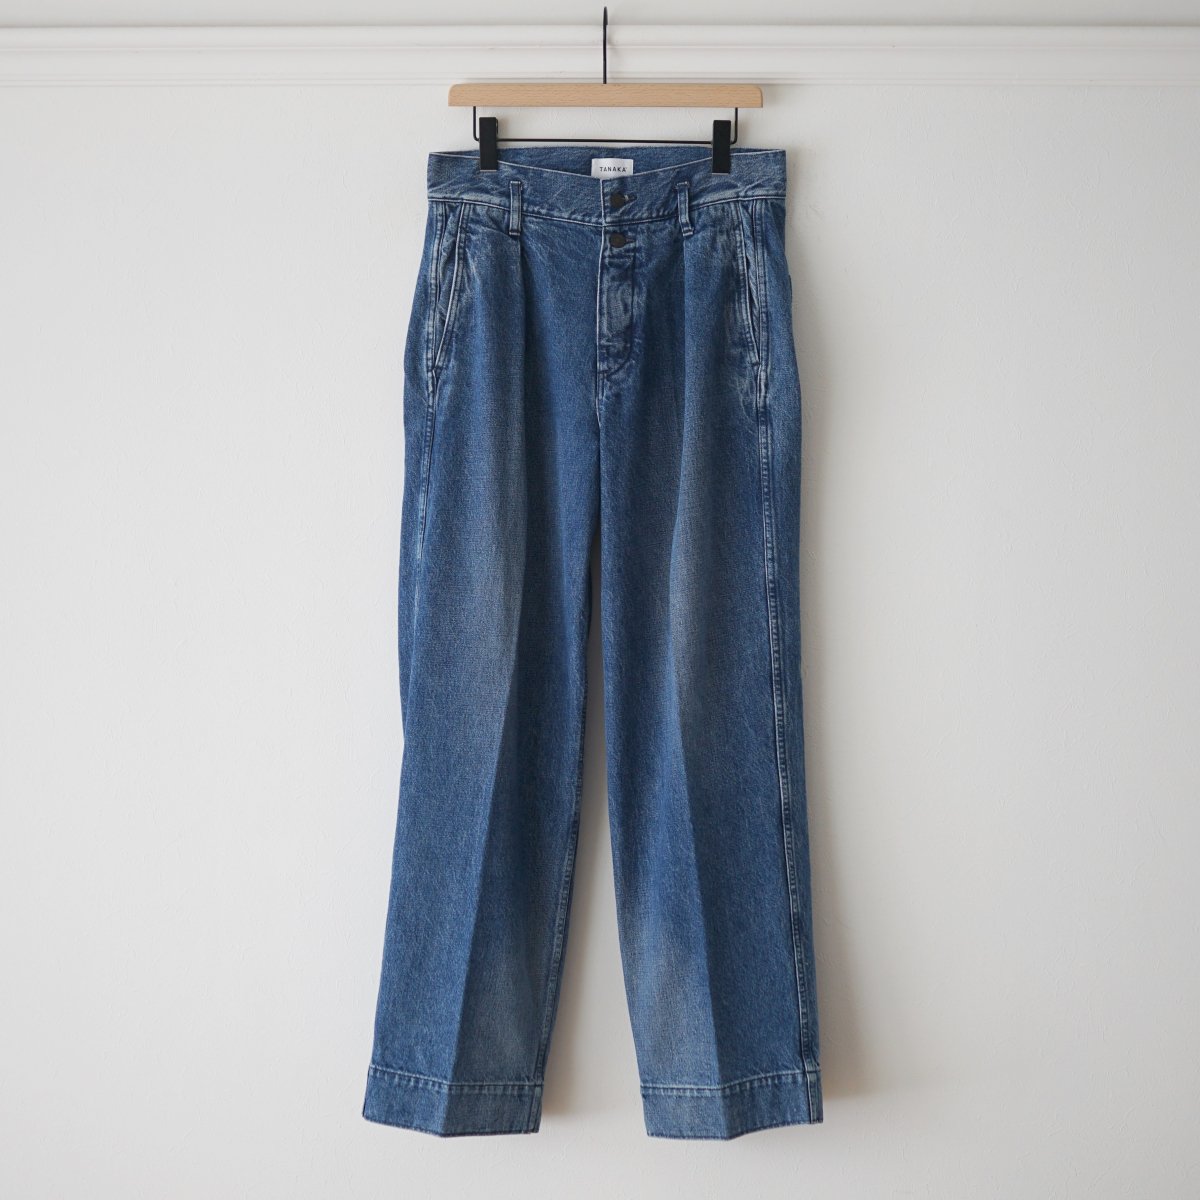 【TANAKA タナカ】 THE WIDE JEAN TROUSERS - VINTAGE BLUE